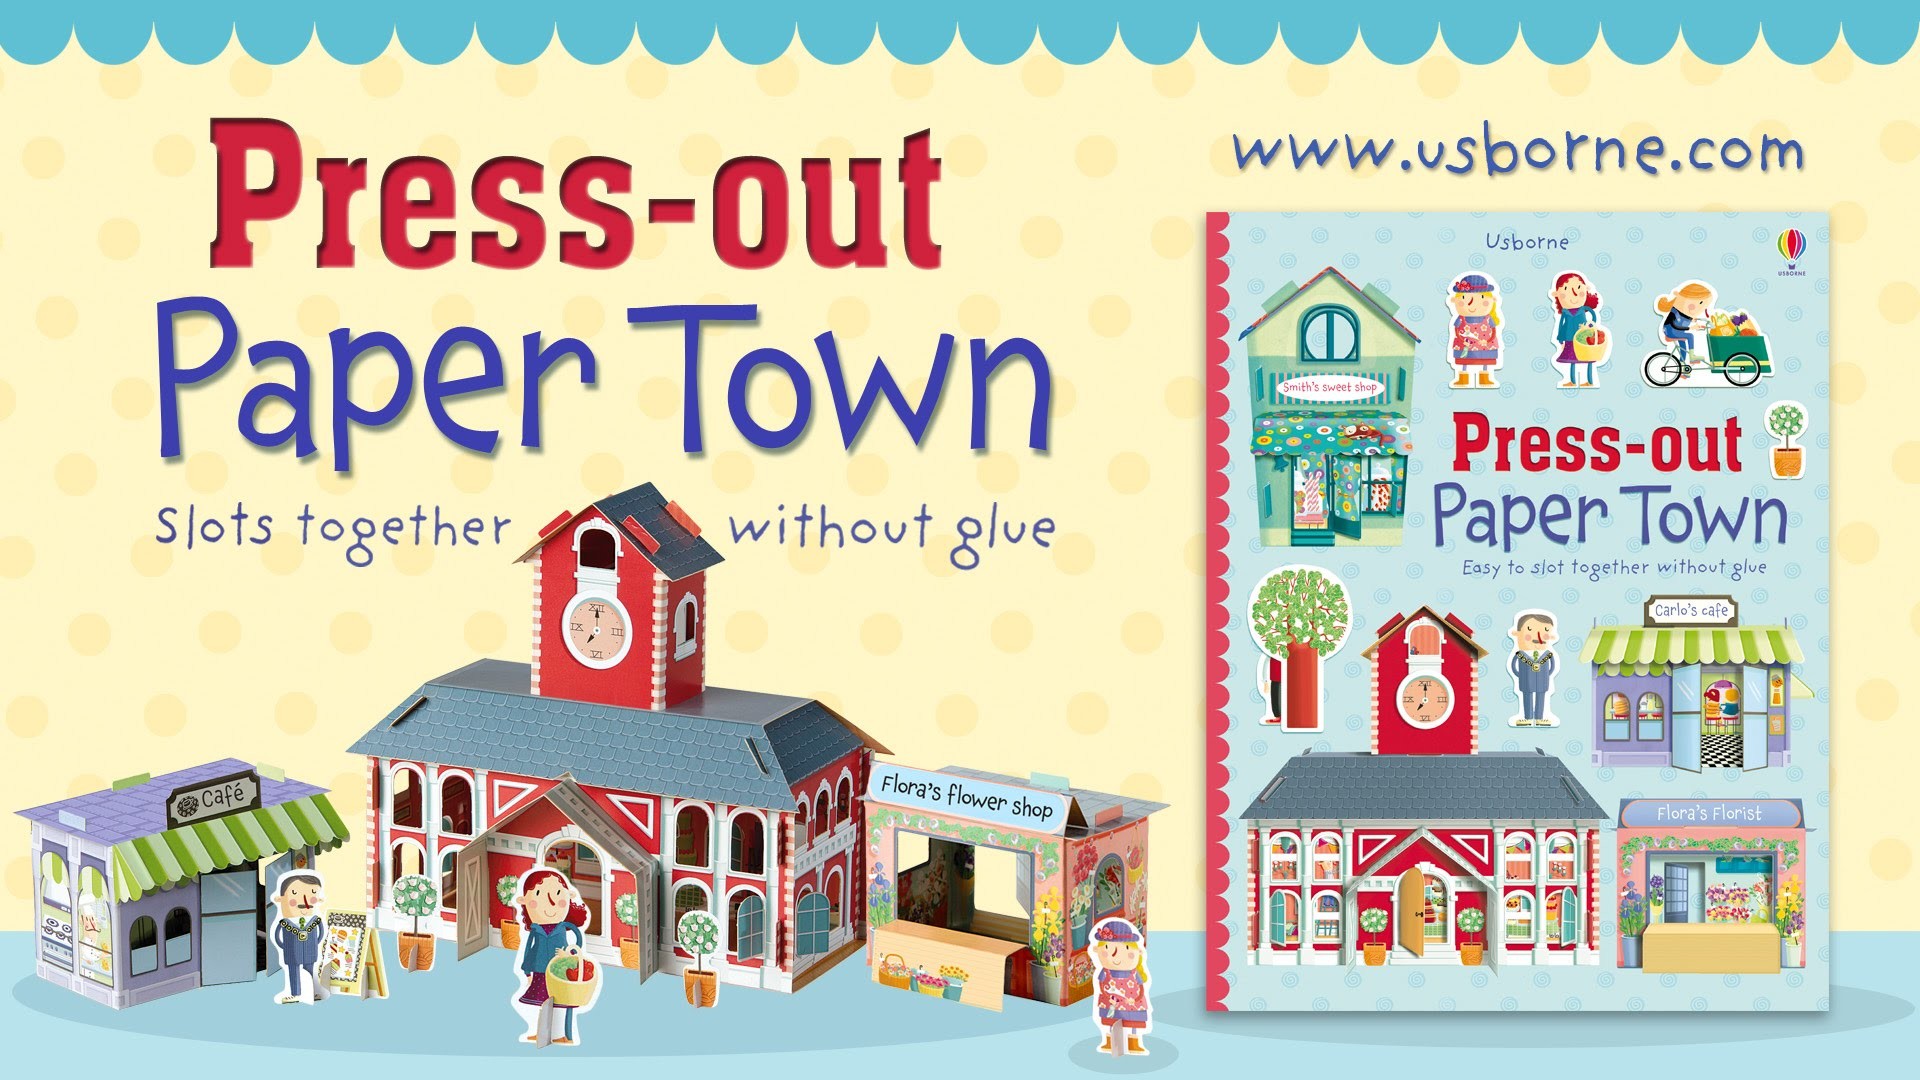 Pressed out. Press — out paper Town. Usborne Publishing. Usborne книги русском. Paper Town book about.